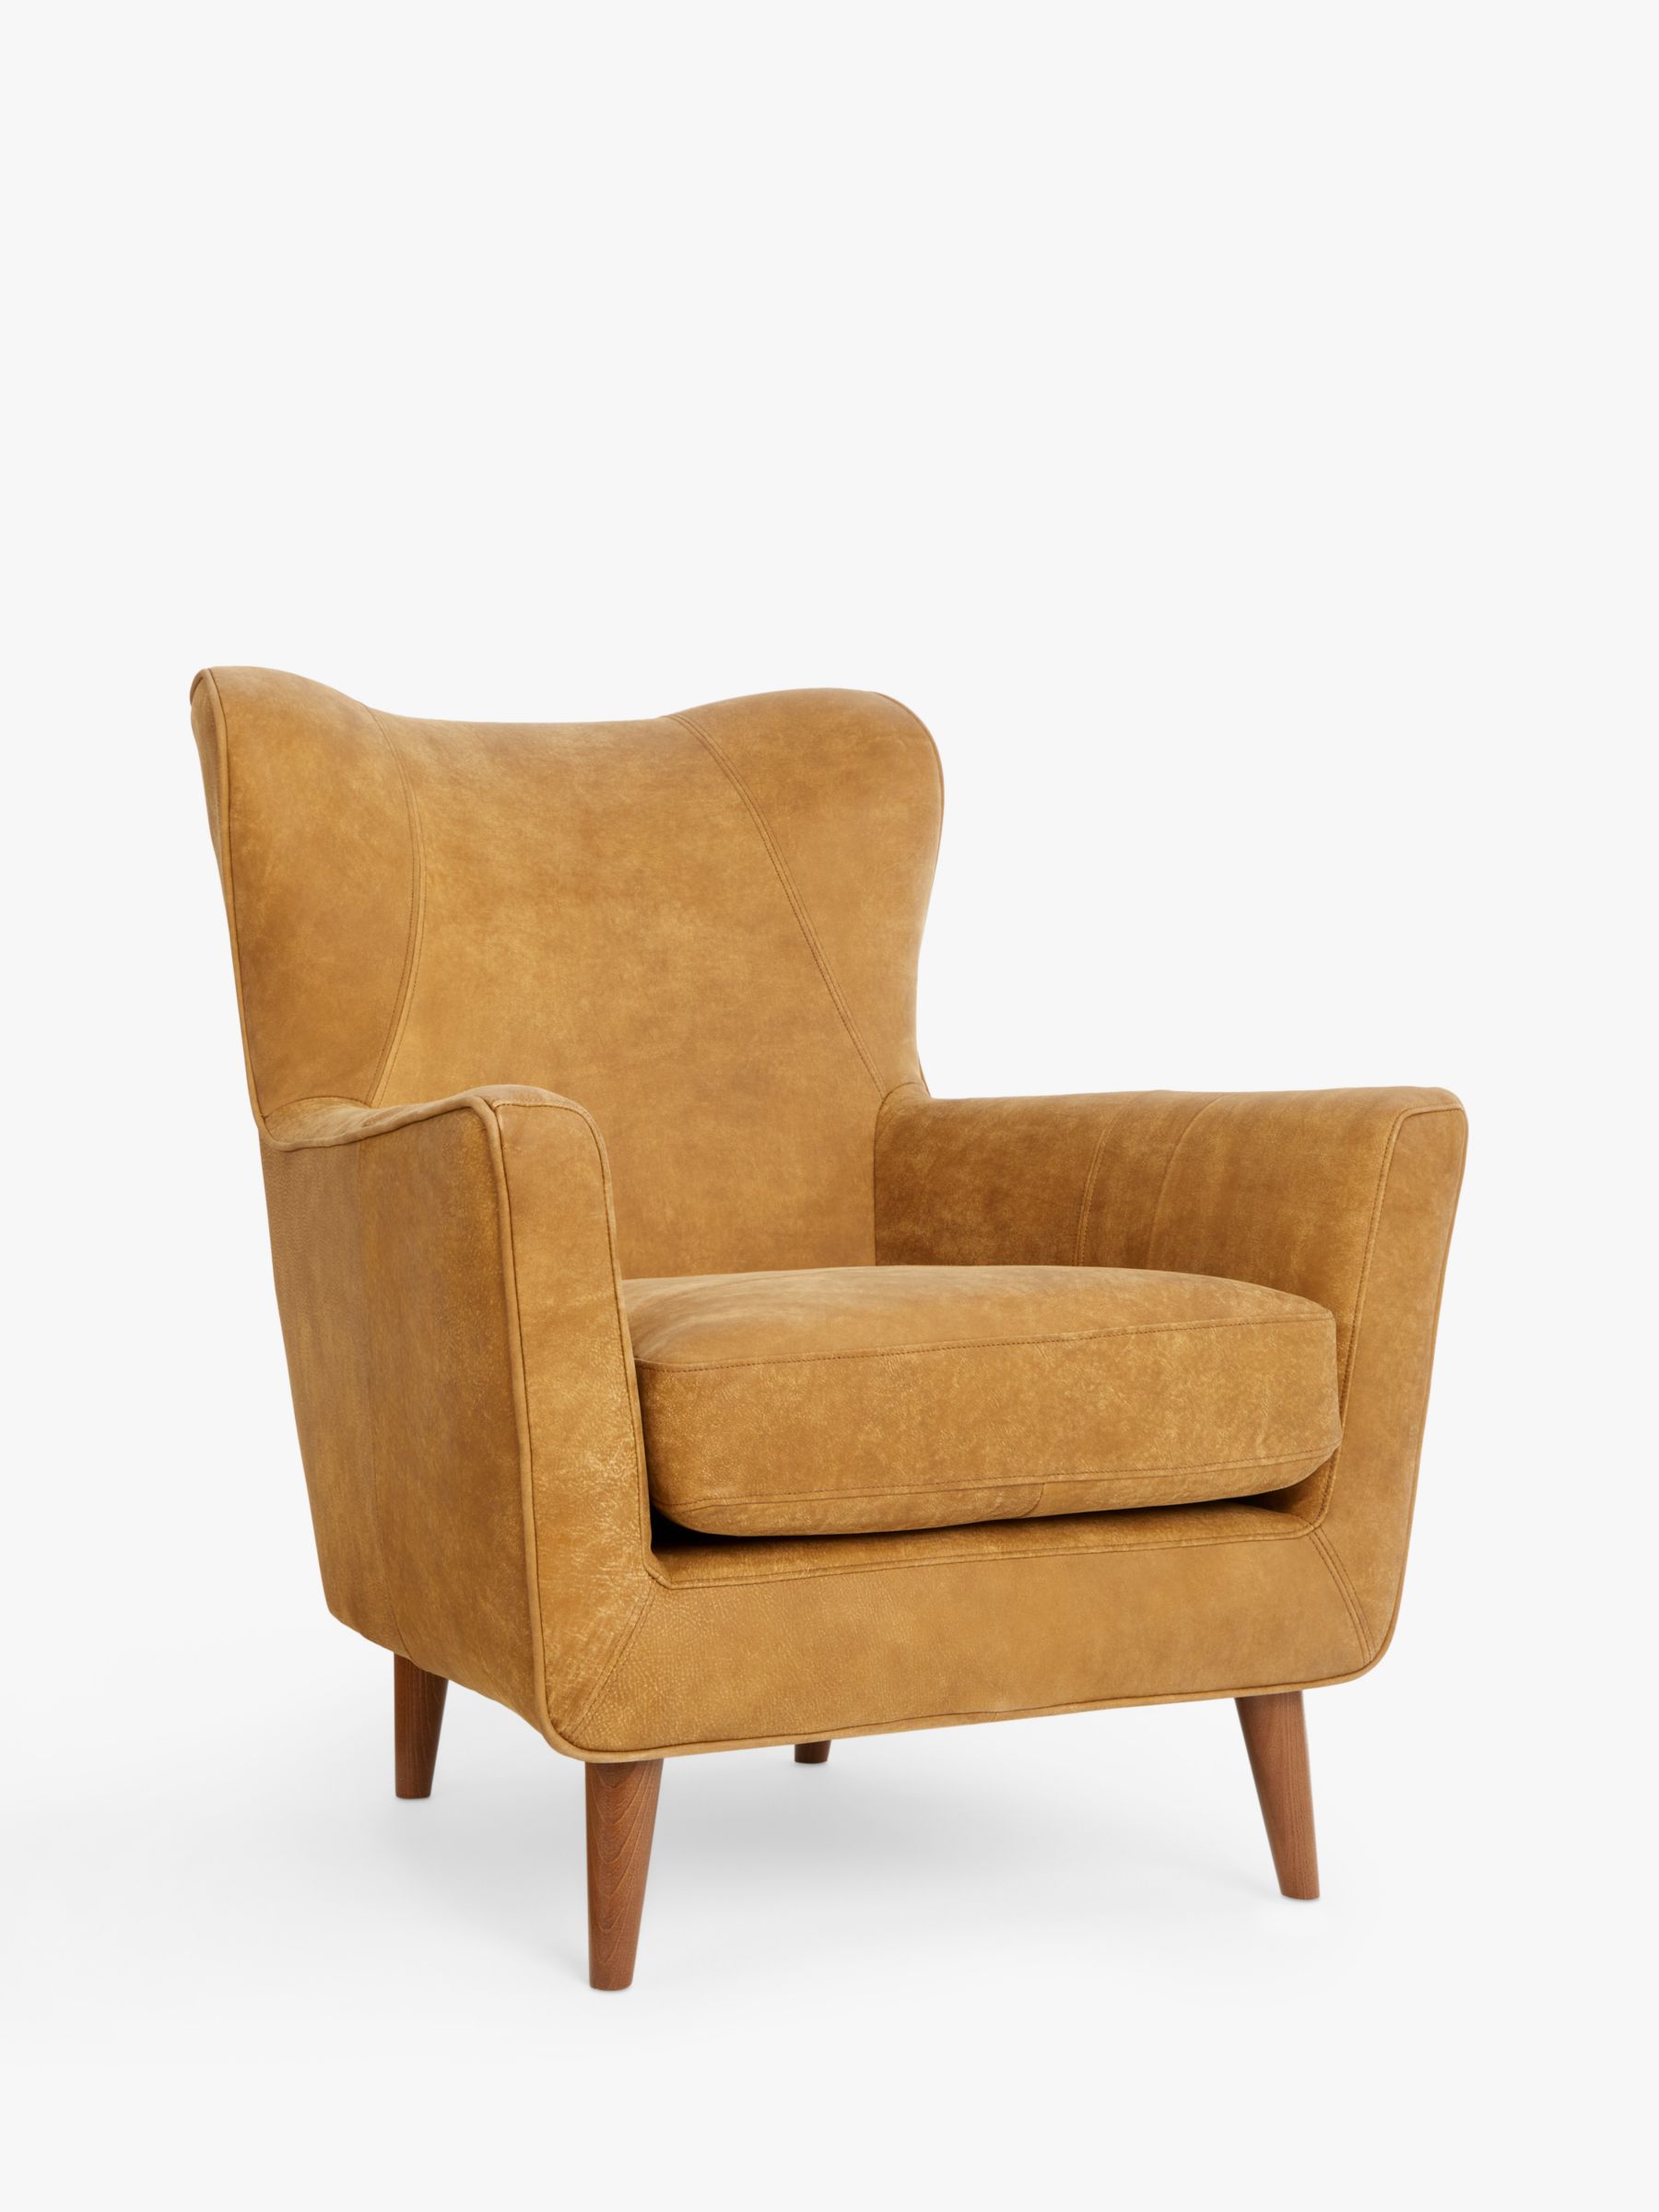 New John lewis chair back covers for Home Decor